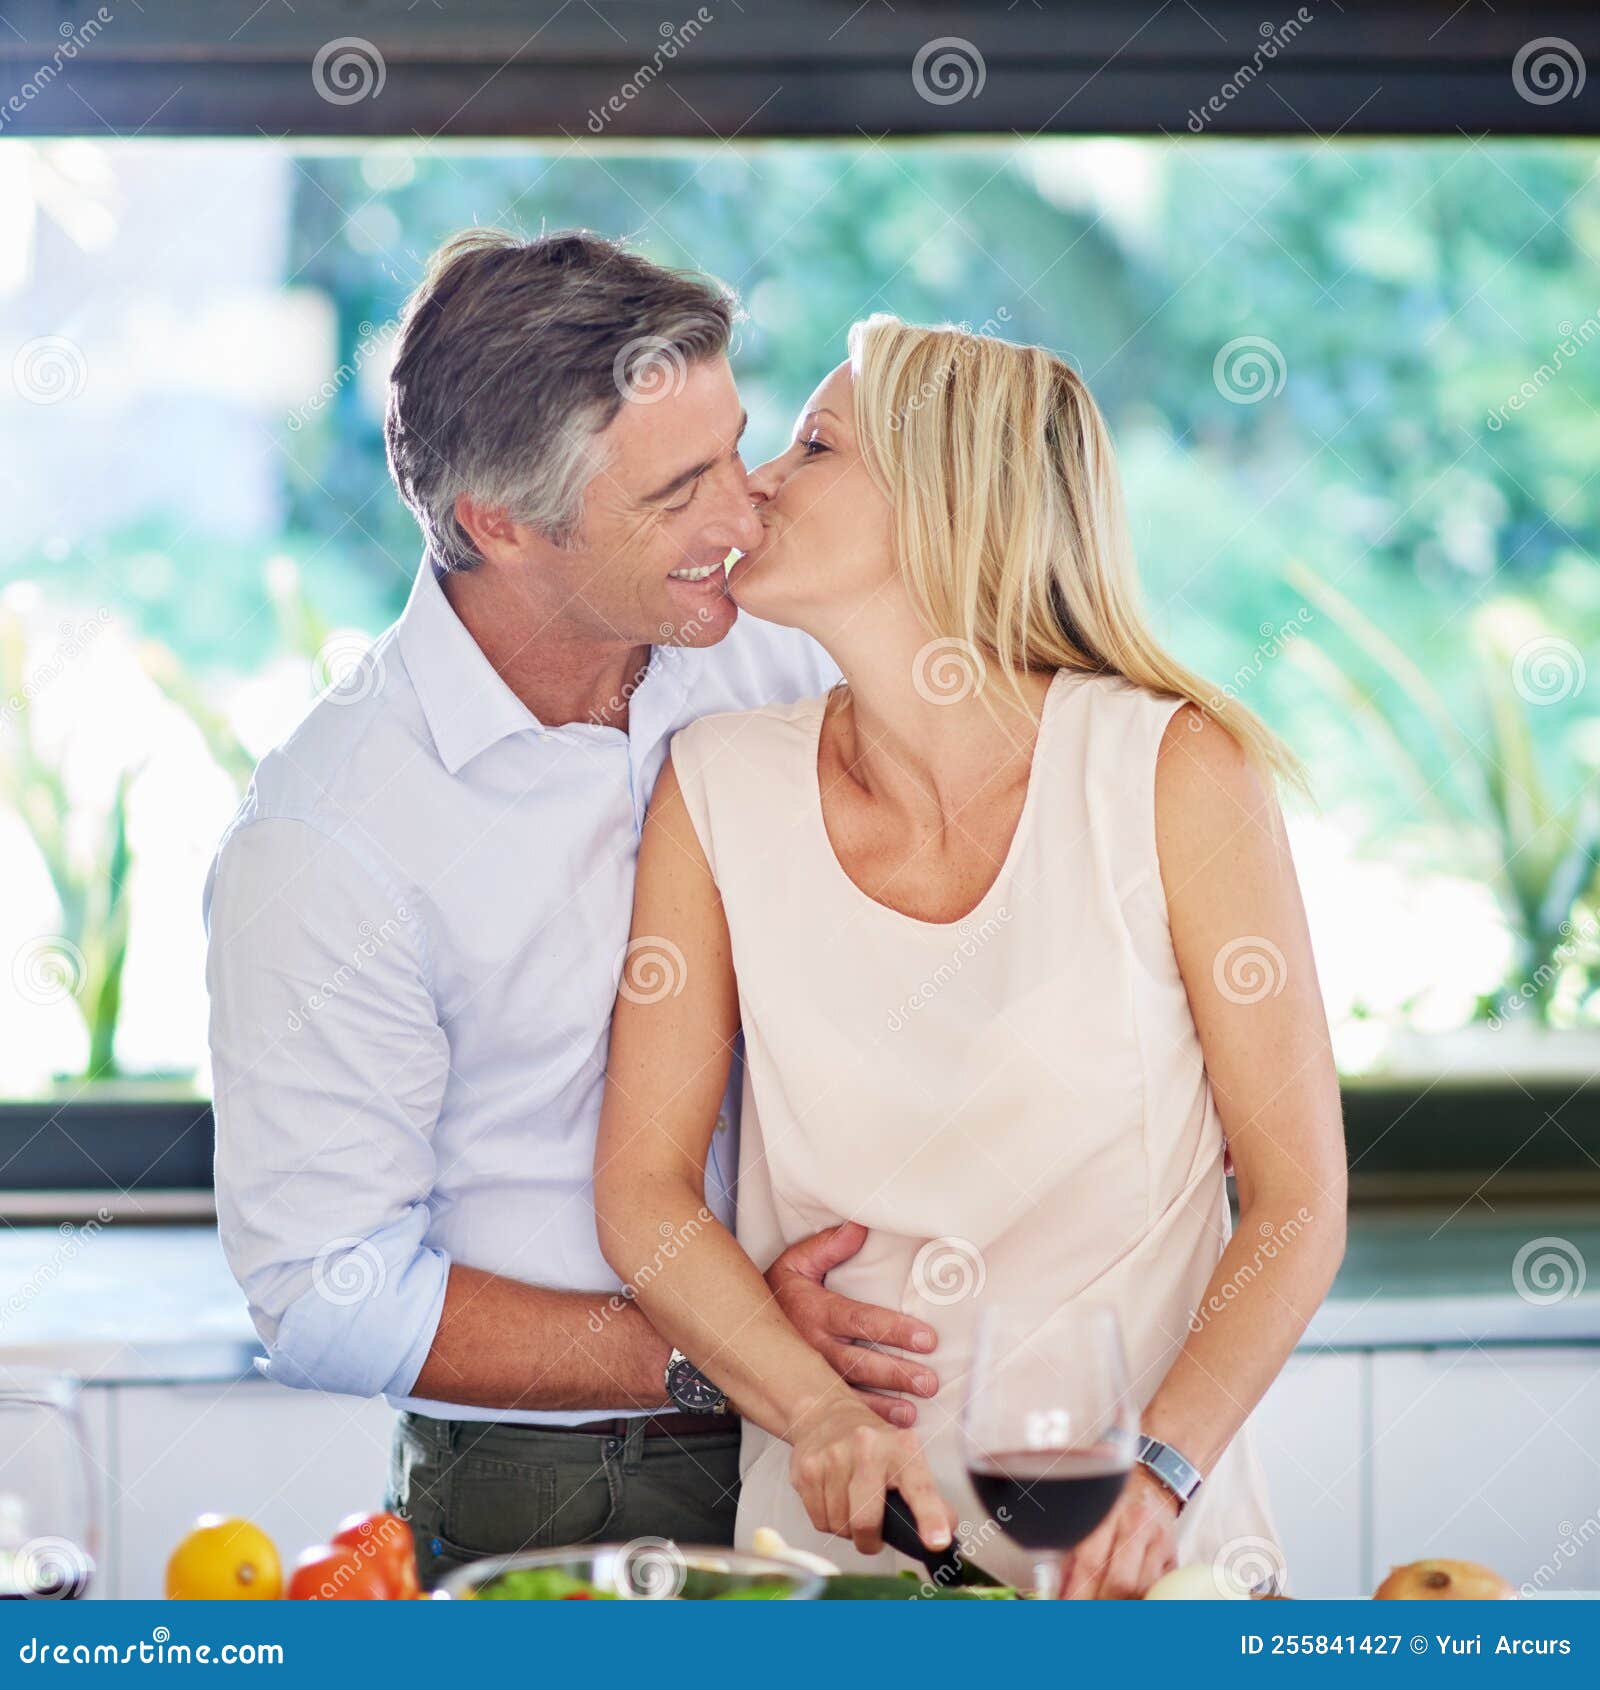 Kitchen Romance. an Affectionate Couple Cooking Dinner. Stock Image ...